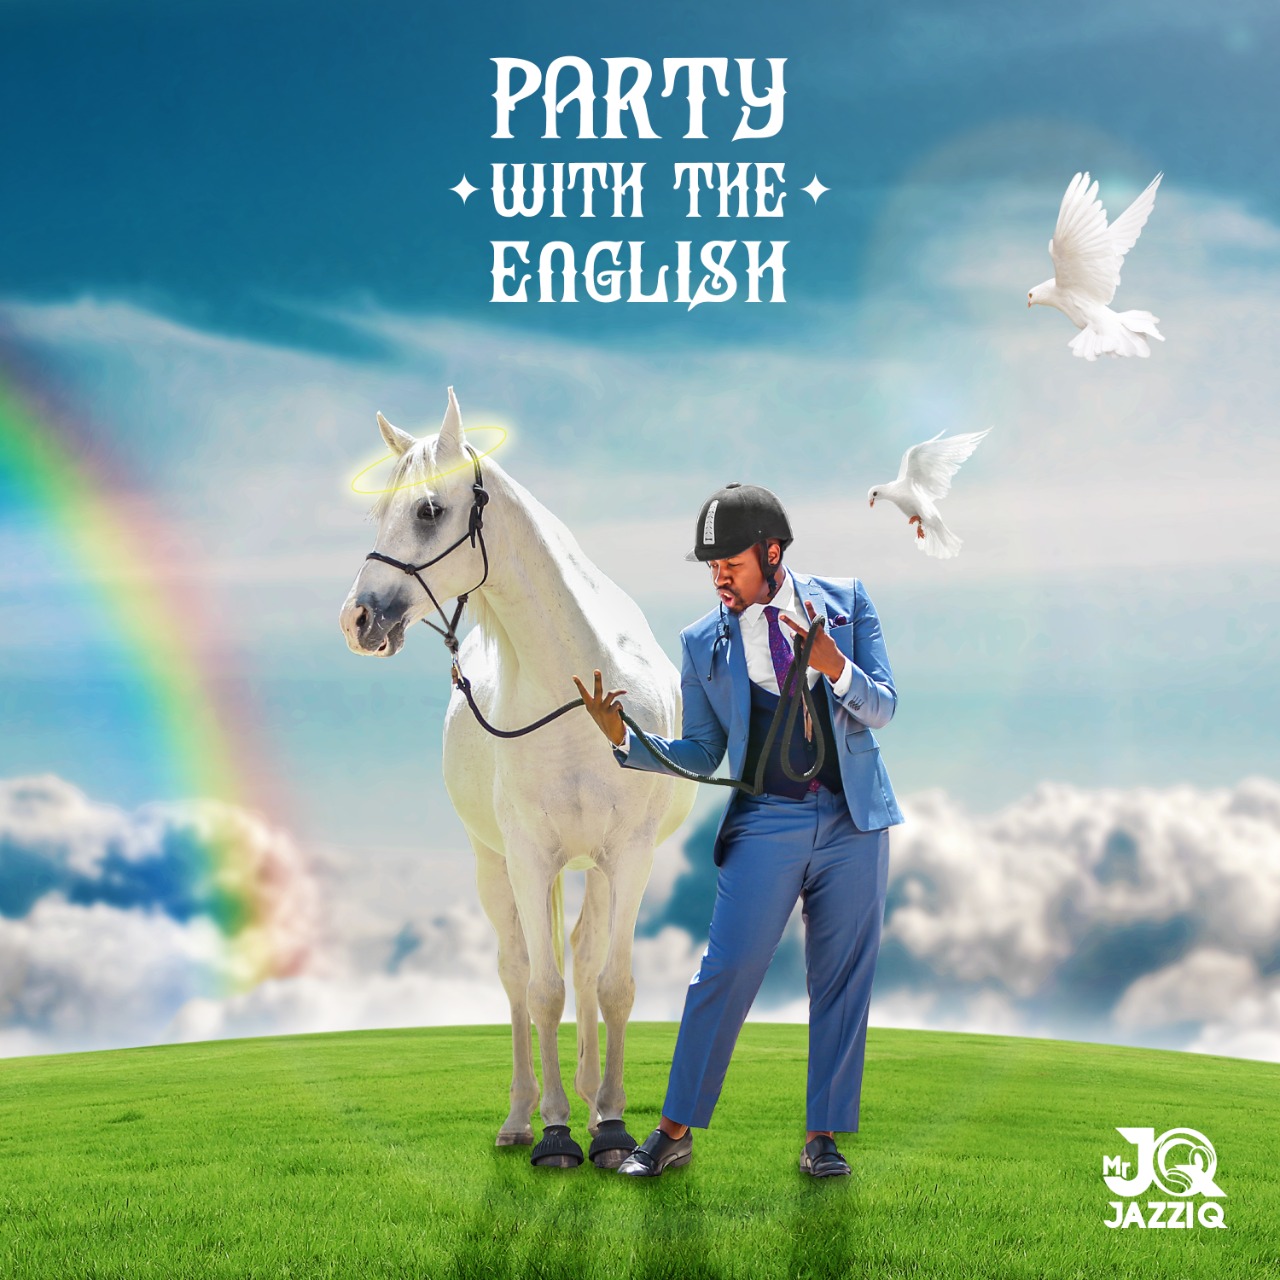 JazziQ's "Party With The English"